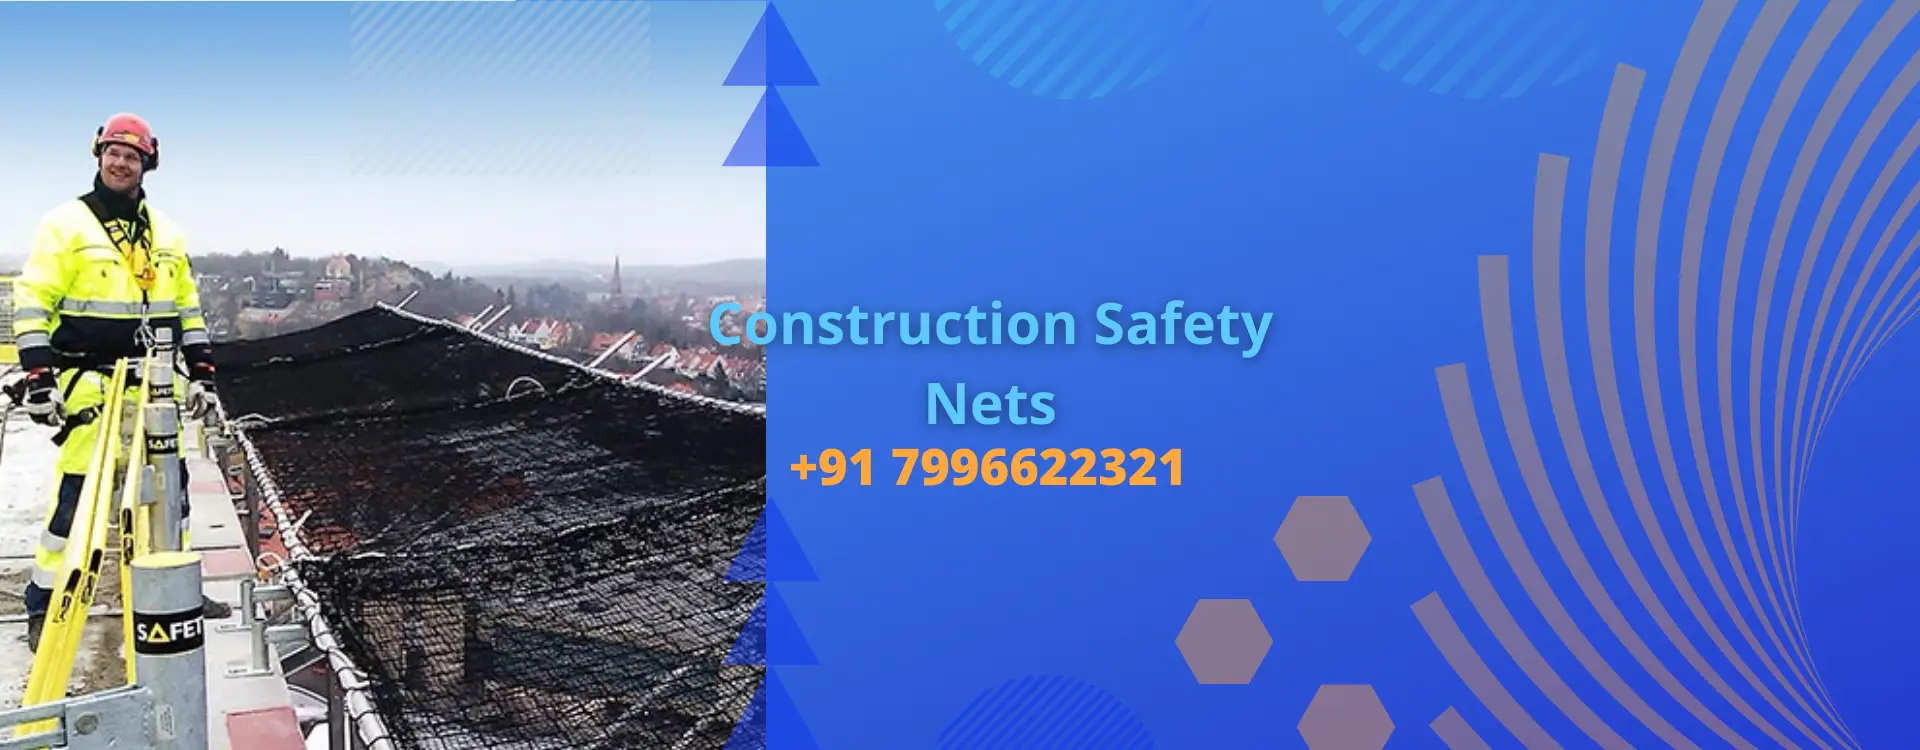 safety nets dealers in Chennai